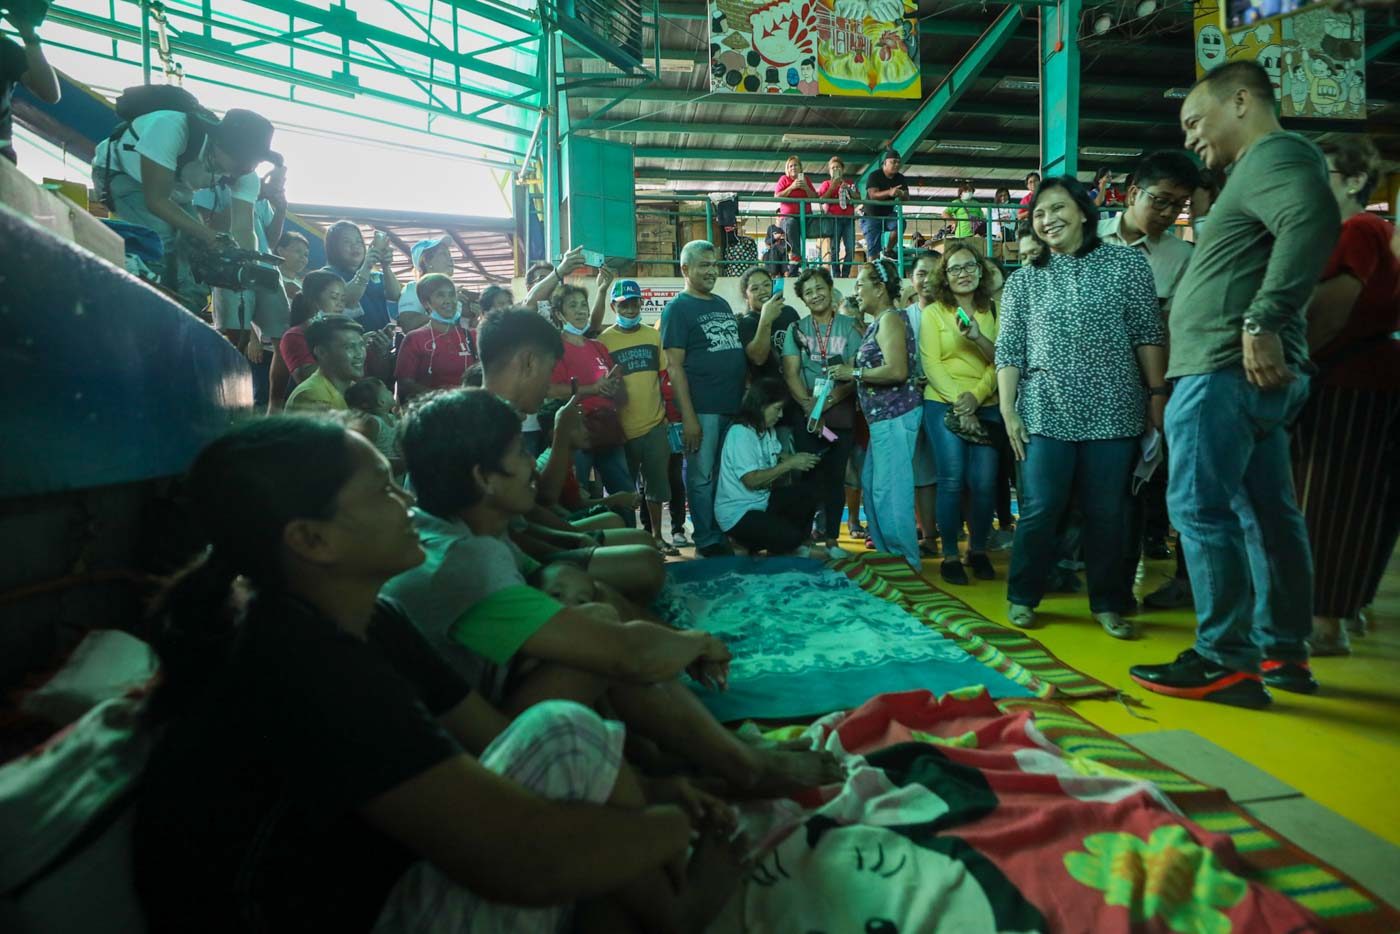 RELIEF FOR BATANGAS. Vice President Leni Robredo visits San Jose, Batangas on Tuesday, Jan. 14, 2020, to bring relief aid to residents displaced by the unrest of Taal Volcano. File photo by Jay Ganzon/OVP 